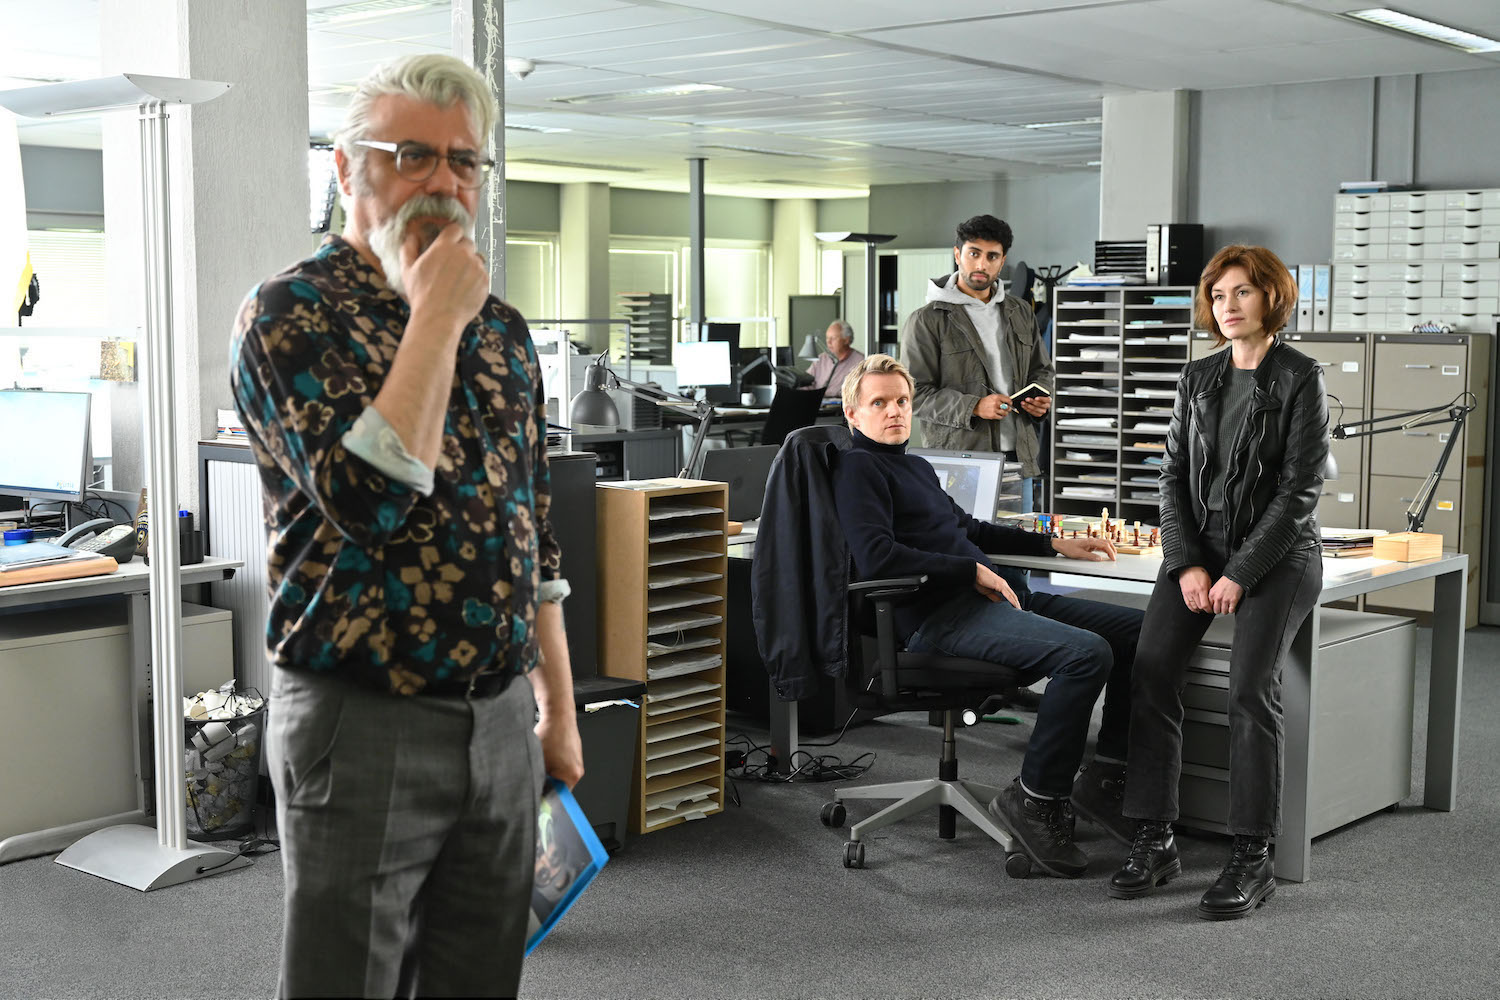 Picture shows: Pathologist Hendrik Davie (Darrel D'Silva) ponders the case while Piet Van der Valk (Marc Warren), seated at his desk, Eddie Suleman (Azan Ahmed), and Lucienne Hassell (Mamie McCoy) await his findings.